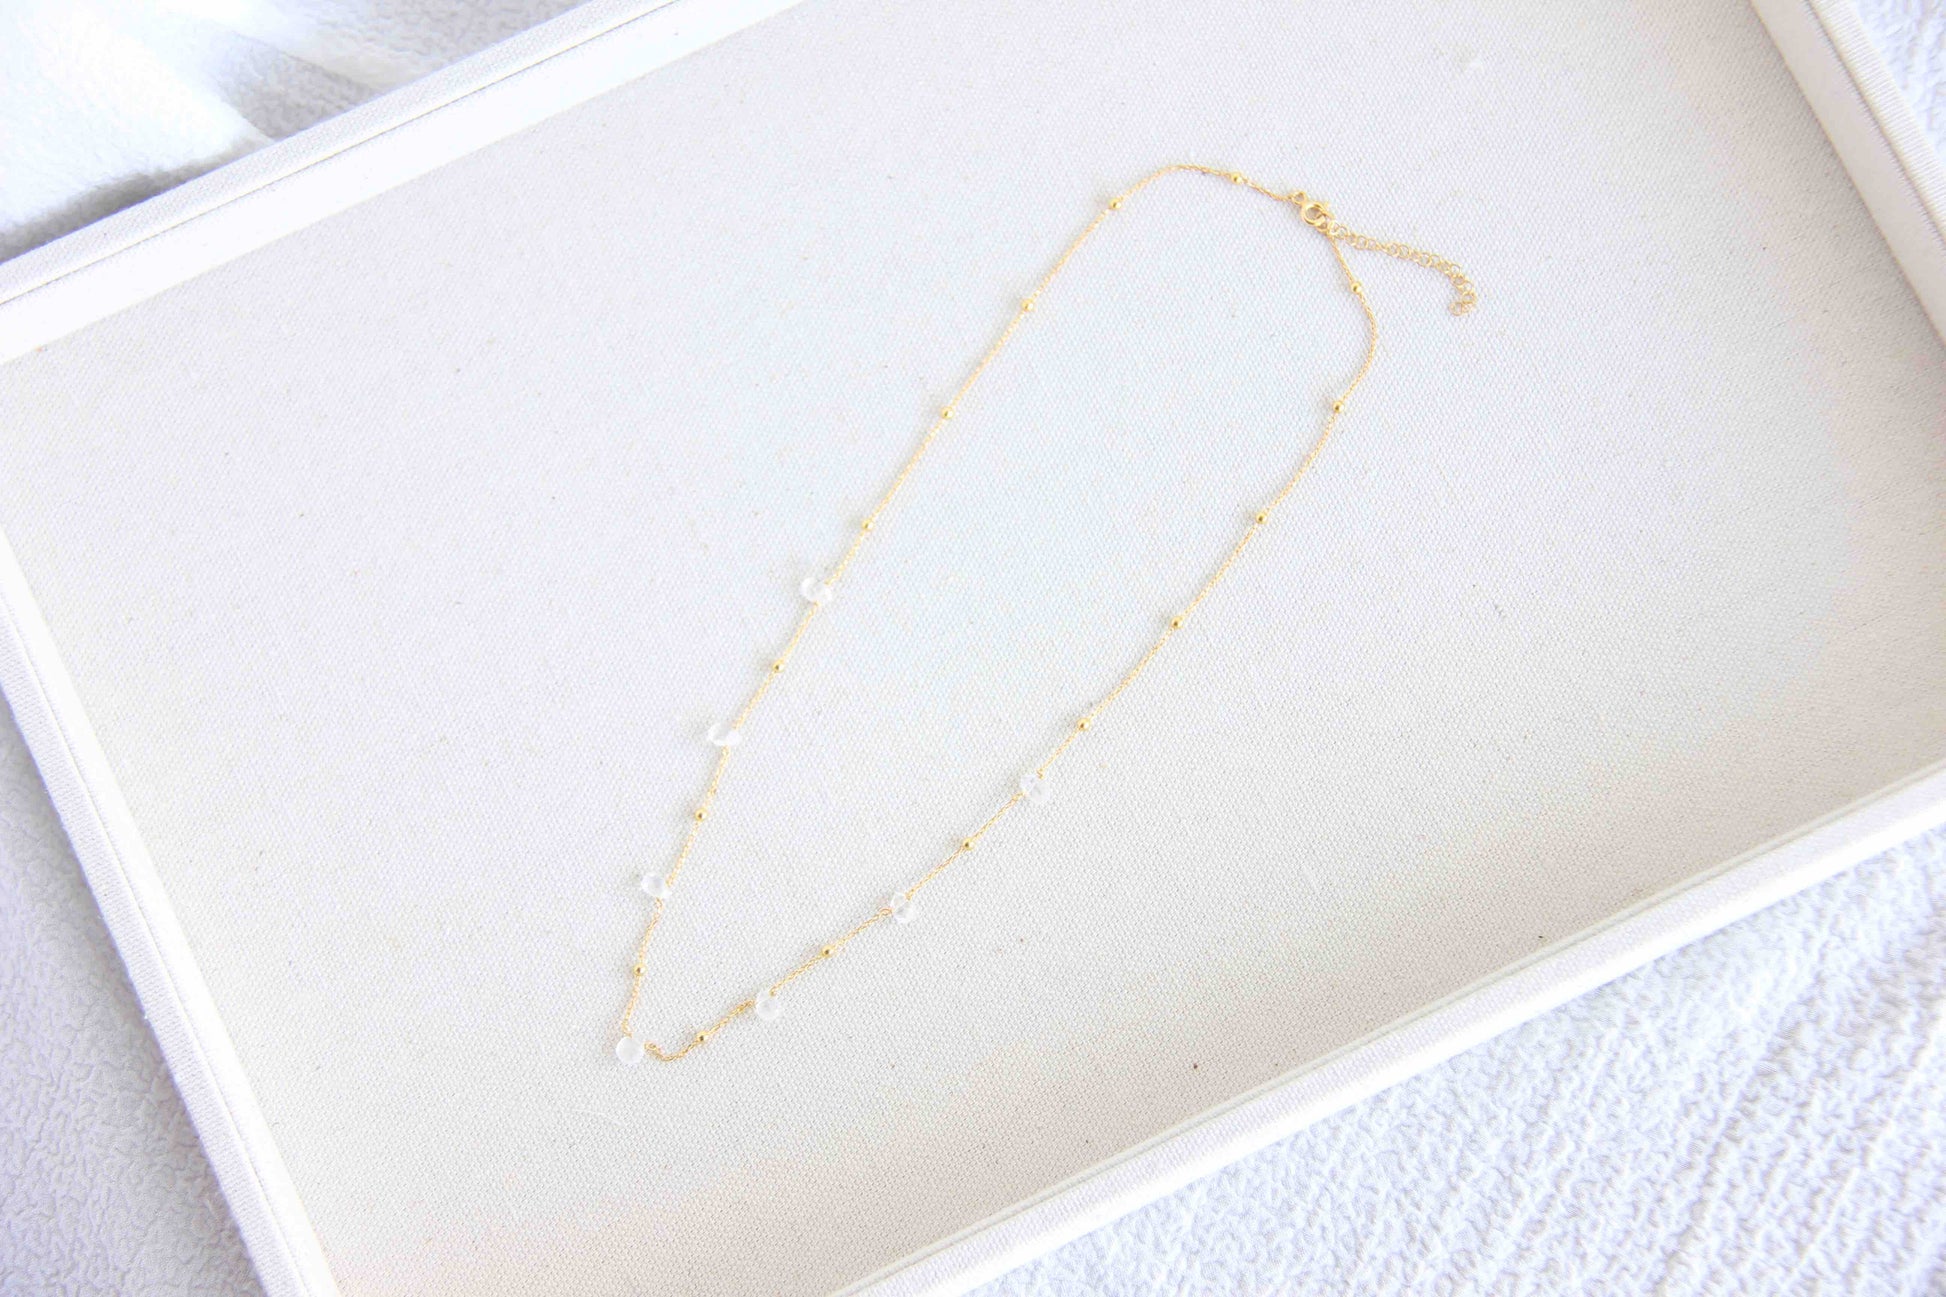 Moonstone 3 layer gold chain necklace on solid 925 sterling silver